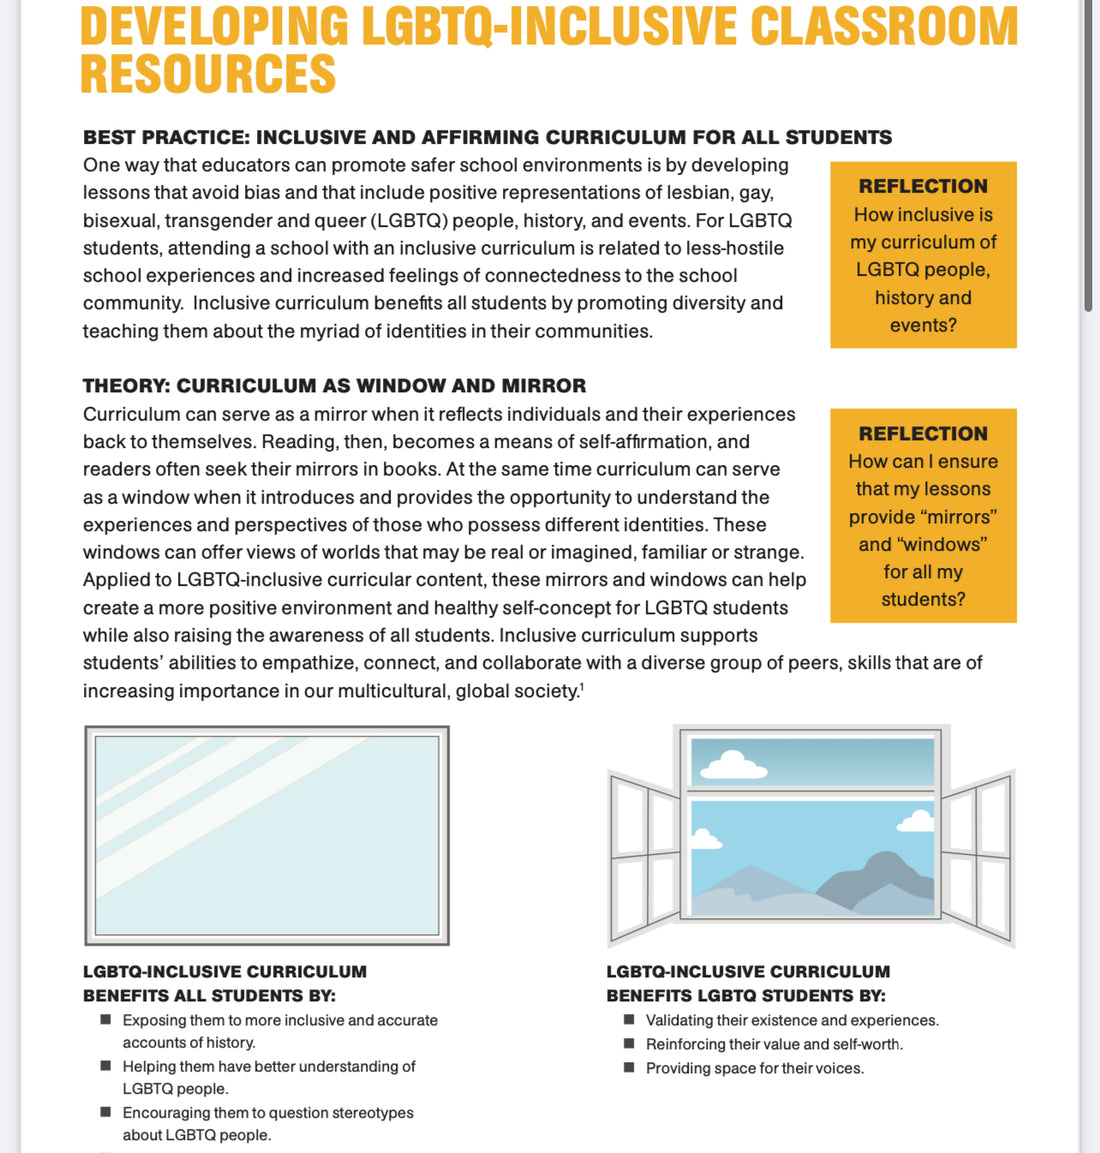 📁 PDF Resource | DEVELOPING LGBTQ-INCLUSIVE CLASSROOM RESOURCES